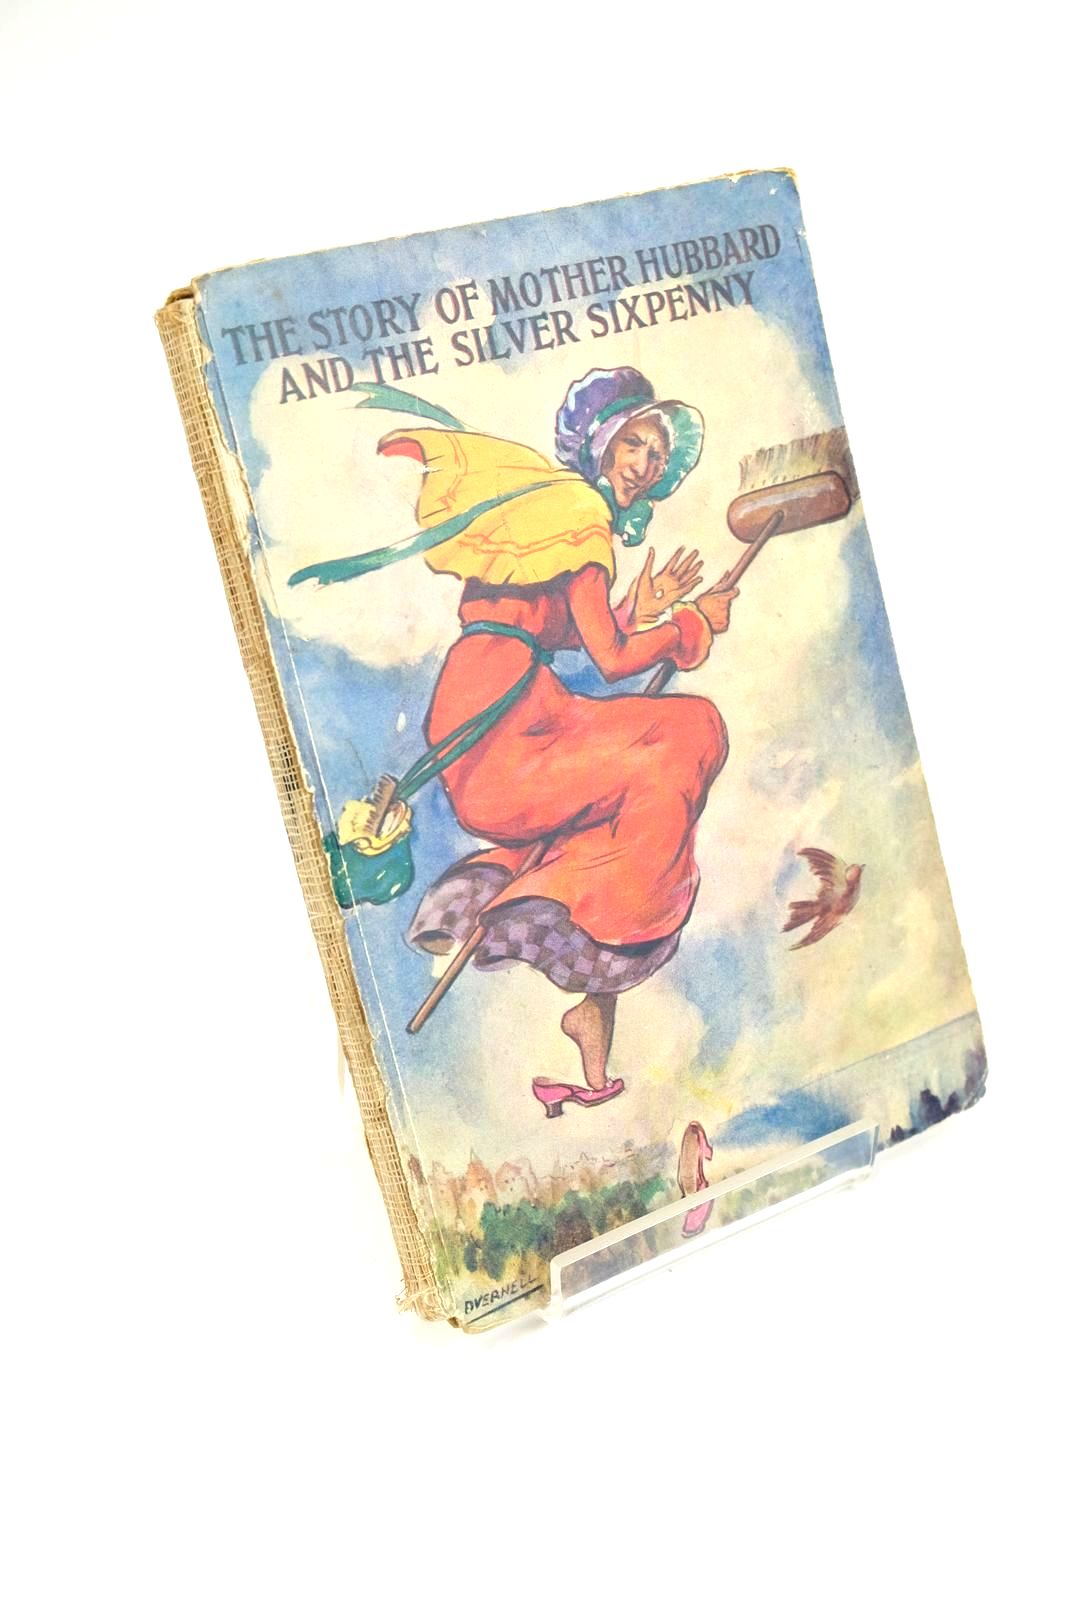 Photo of THE STORY OF MOTHER HUBBARD AND THE SILVER SIXPENNY- Stock Number: 1328082